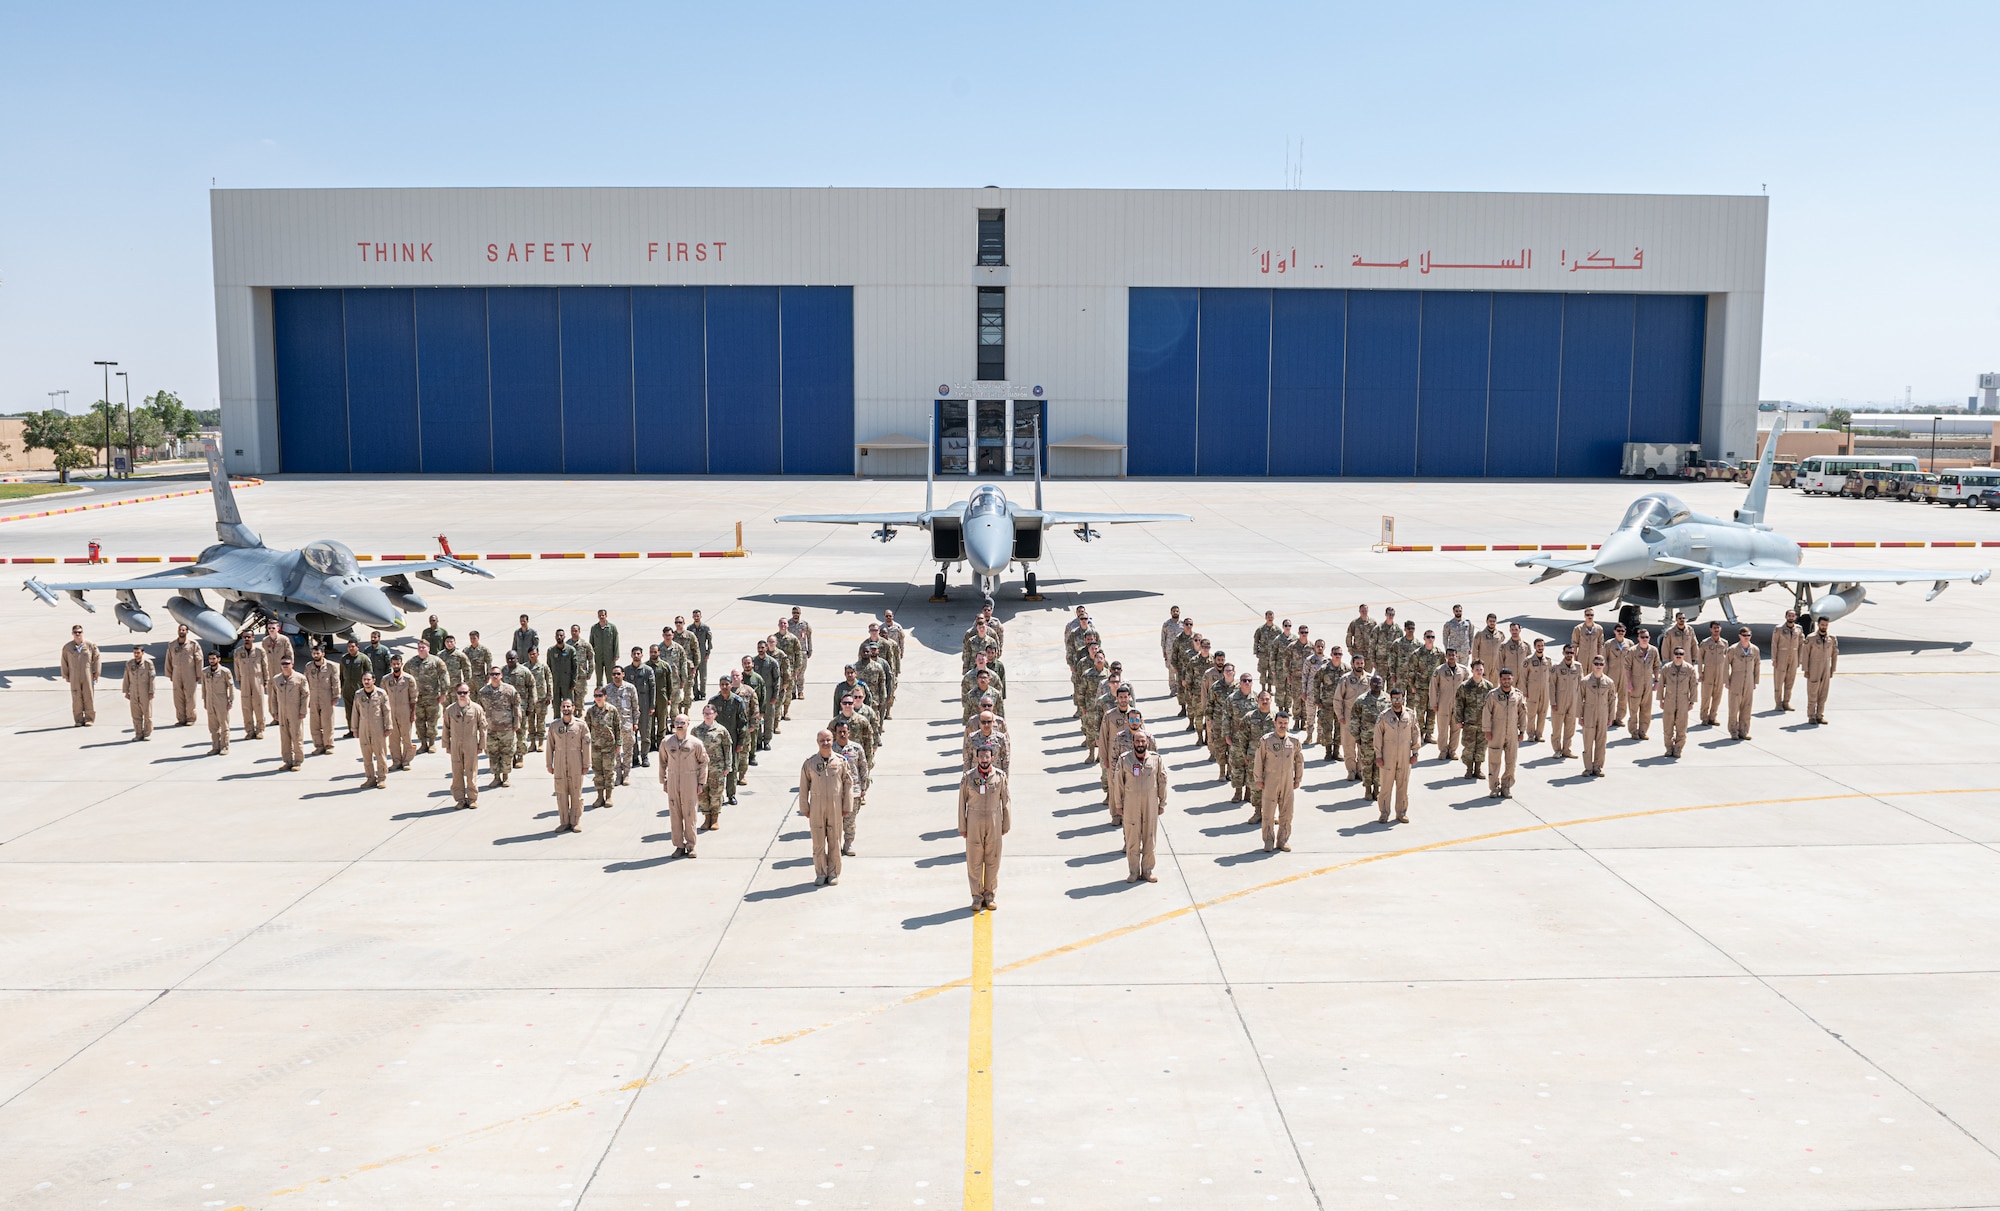 Members of the 378th Air Expeditionary Wing and Royal Saudi Air Force pose for a photo at the Agile Combat Employment capstone event March 4, 2021, at an airbase in the Kingdom of Saudi Arabia.